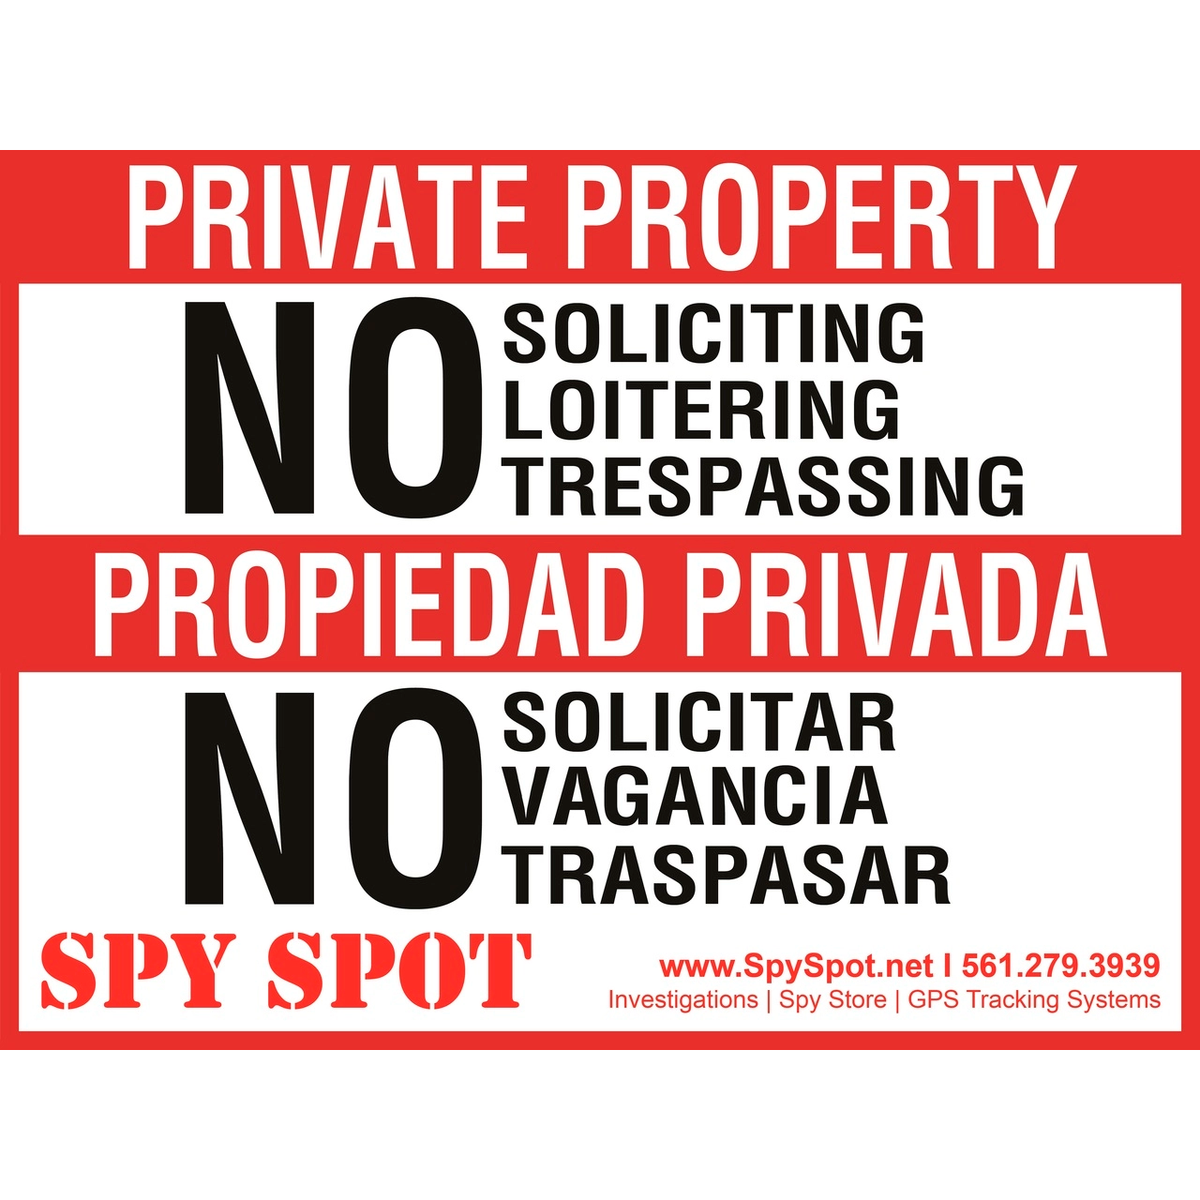 Spy Spot Private Property No Soliciting Loitering Trespassing Warning Sign 15.5"x12"